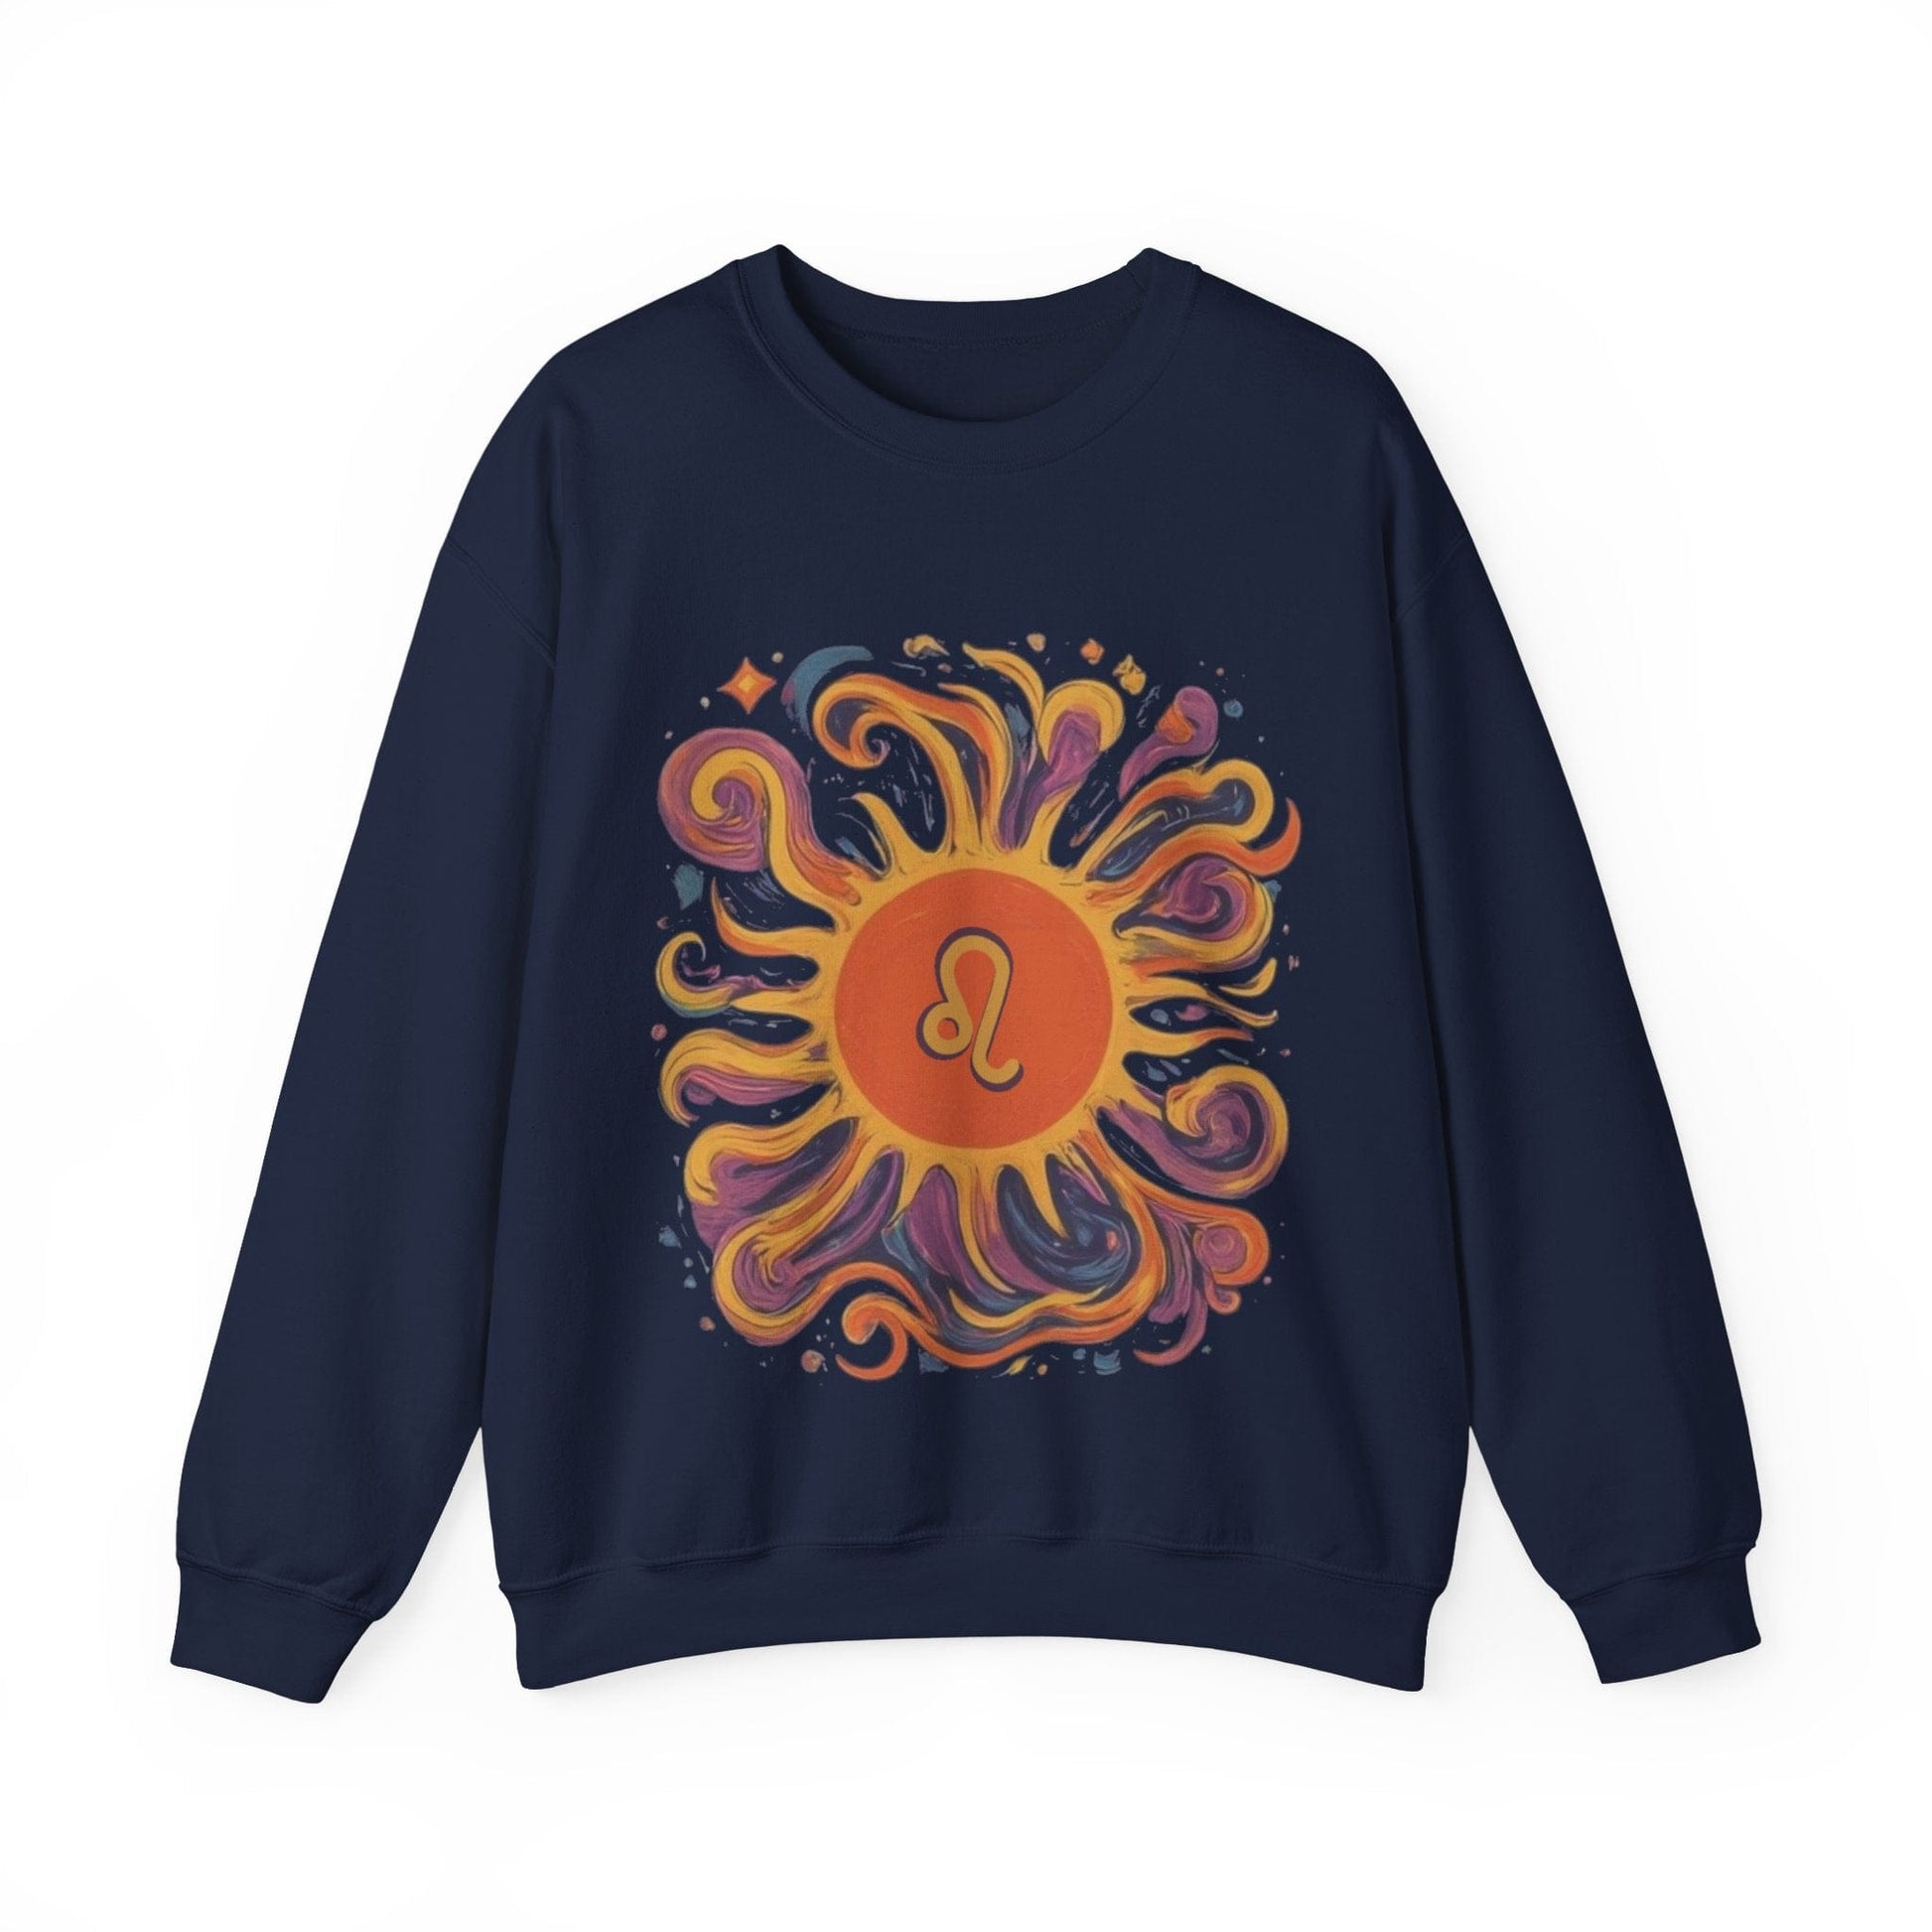 Sweatshirt S / Navy Leo Majestic Sun Soft Sweater: Royal Warmth for the Lion's Heart